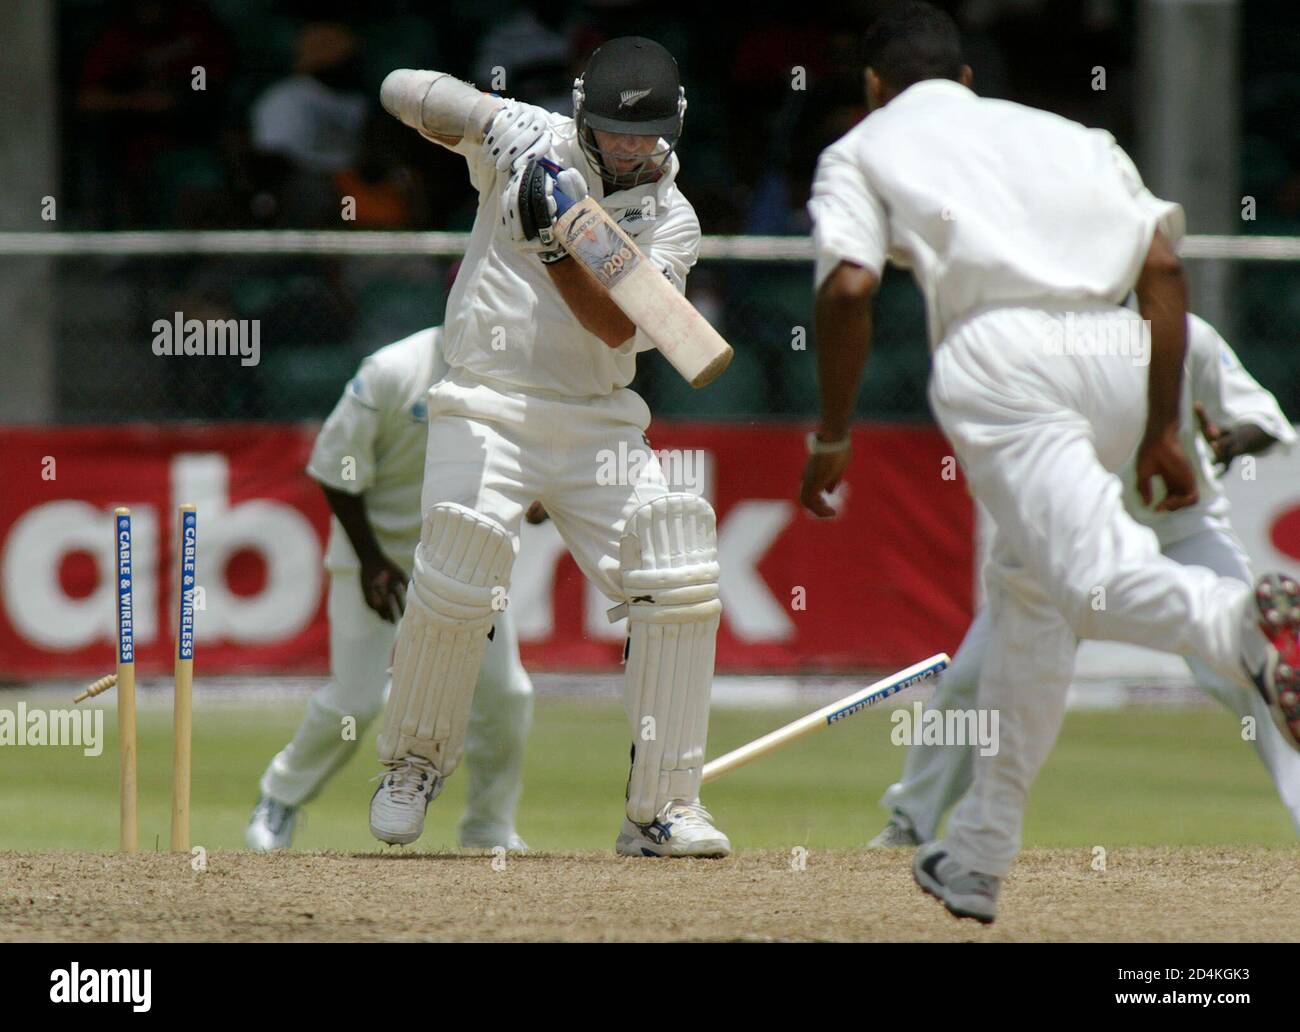 New Zealand batsman Mark Richardson is bowled out by West Indies' Adam  Sanford (R) during the first day of play in the first test in Bridgetown,  Barbados, June 21, 2002. Richardson was